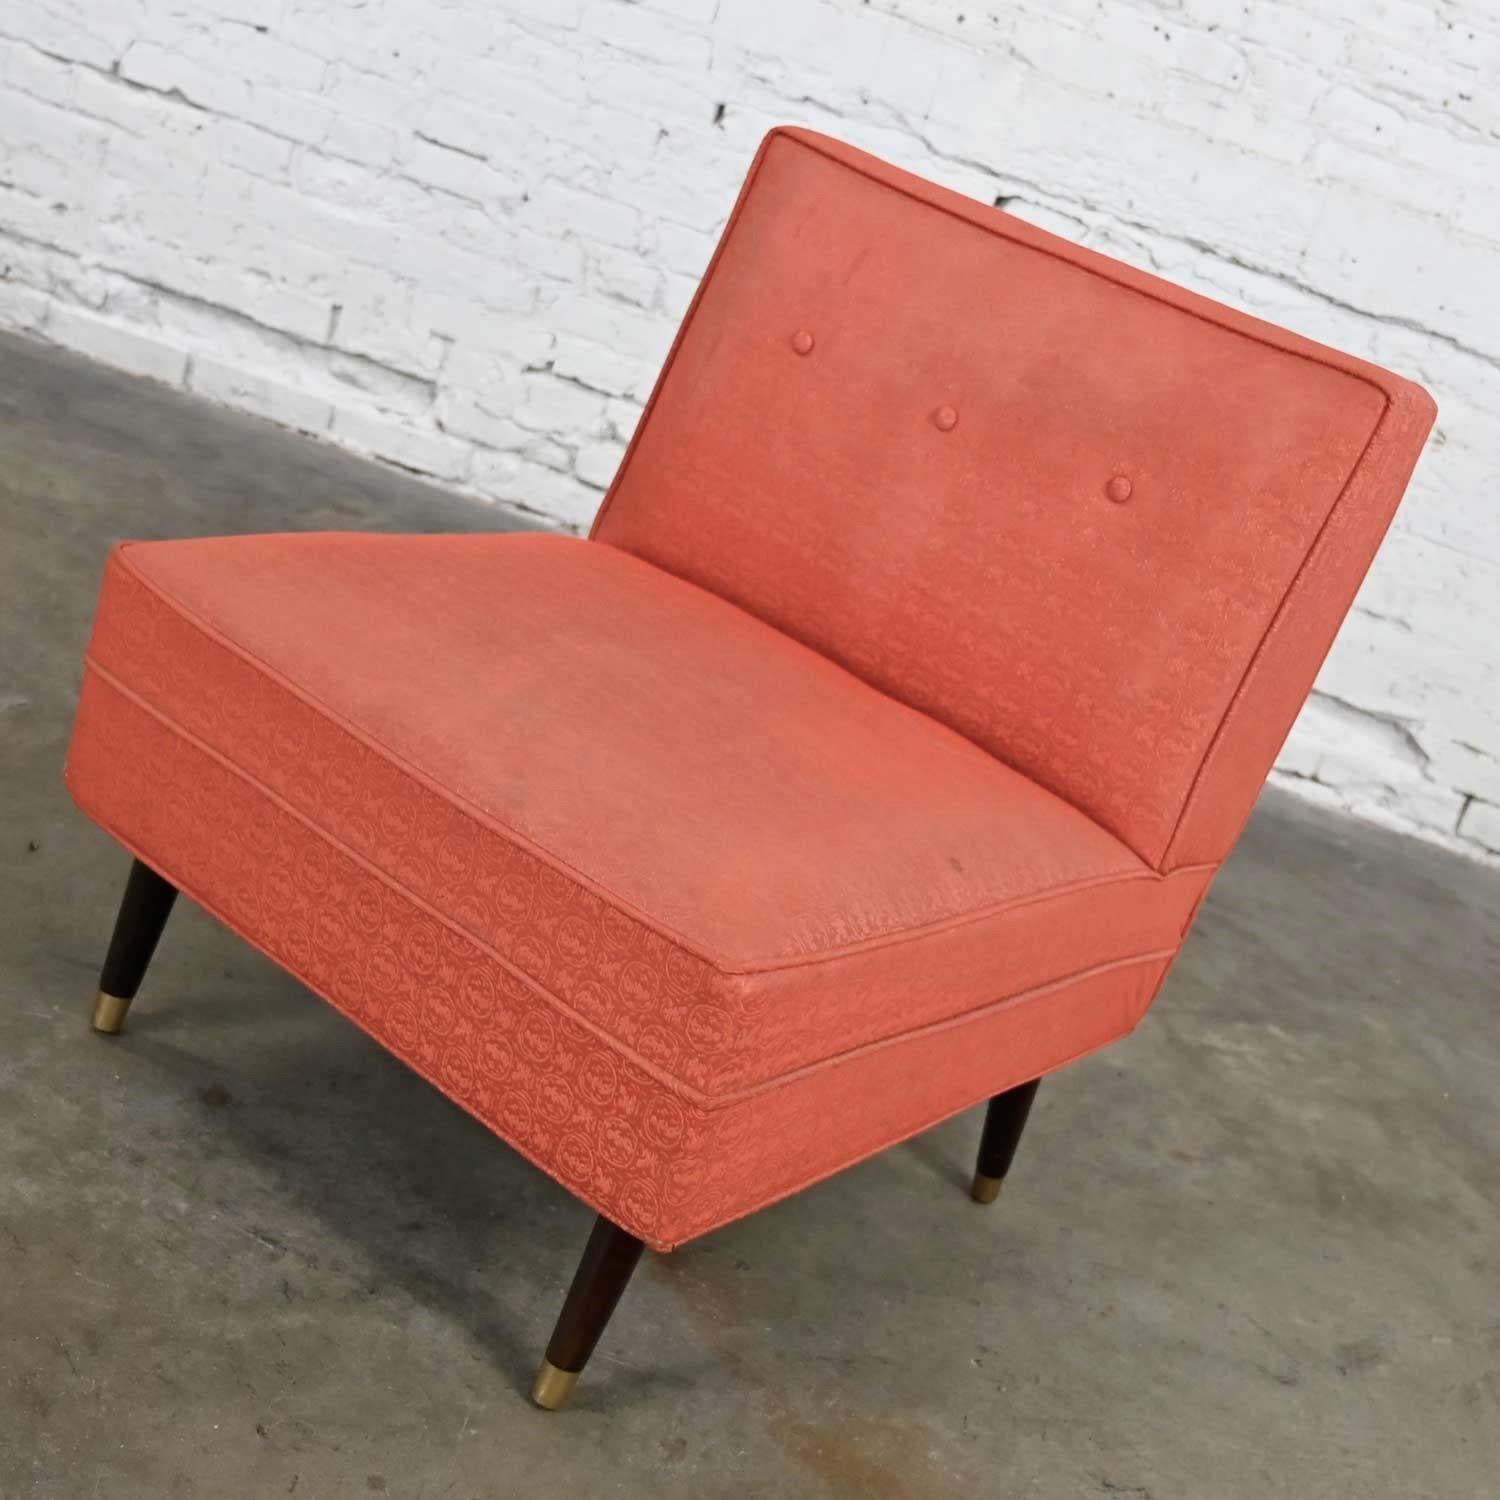 Stunning Mid-Century Modern coral vinyl faux leather slipper chair with tapered walnut-colored legs and brass painted sabots. Beautiful condition, keeping in mind that this is vintage and not new so will have signs of use and wear. The vinyl,